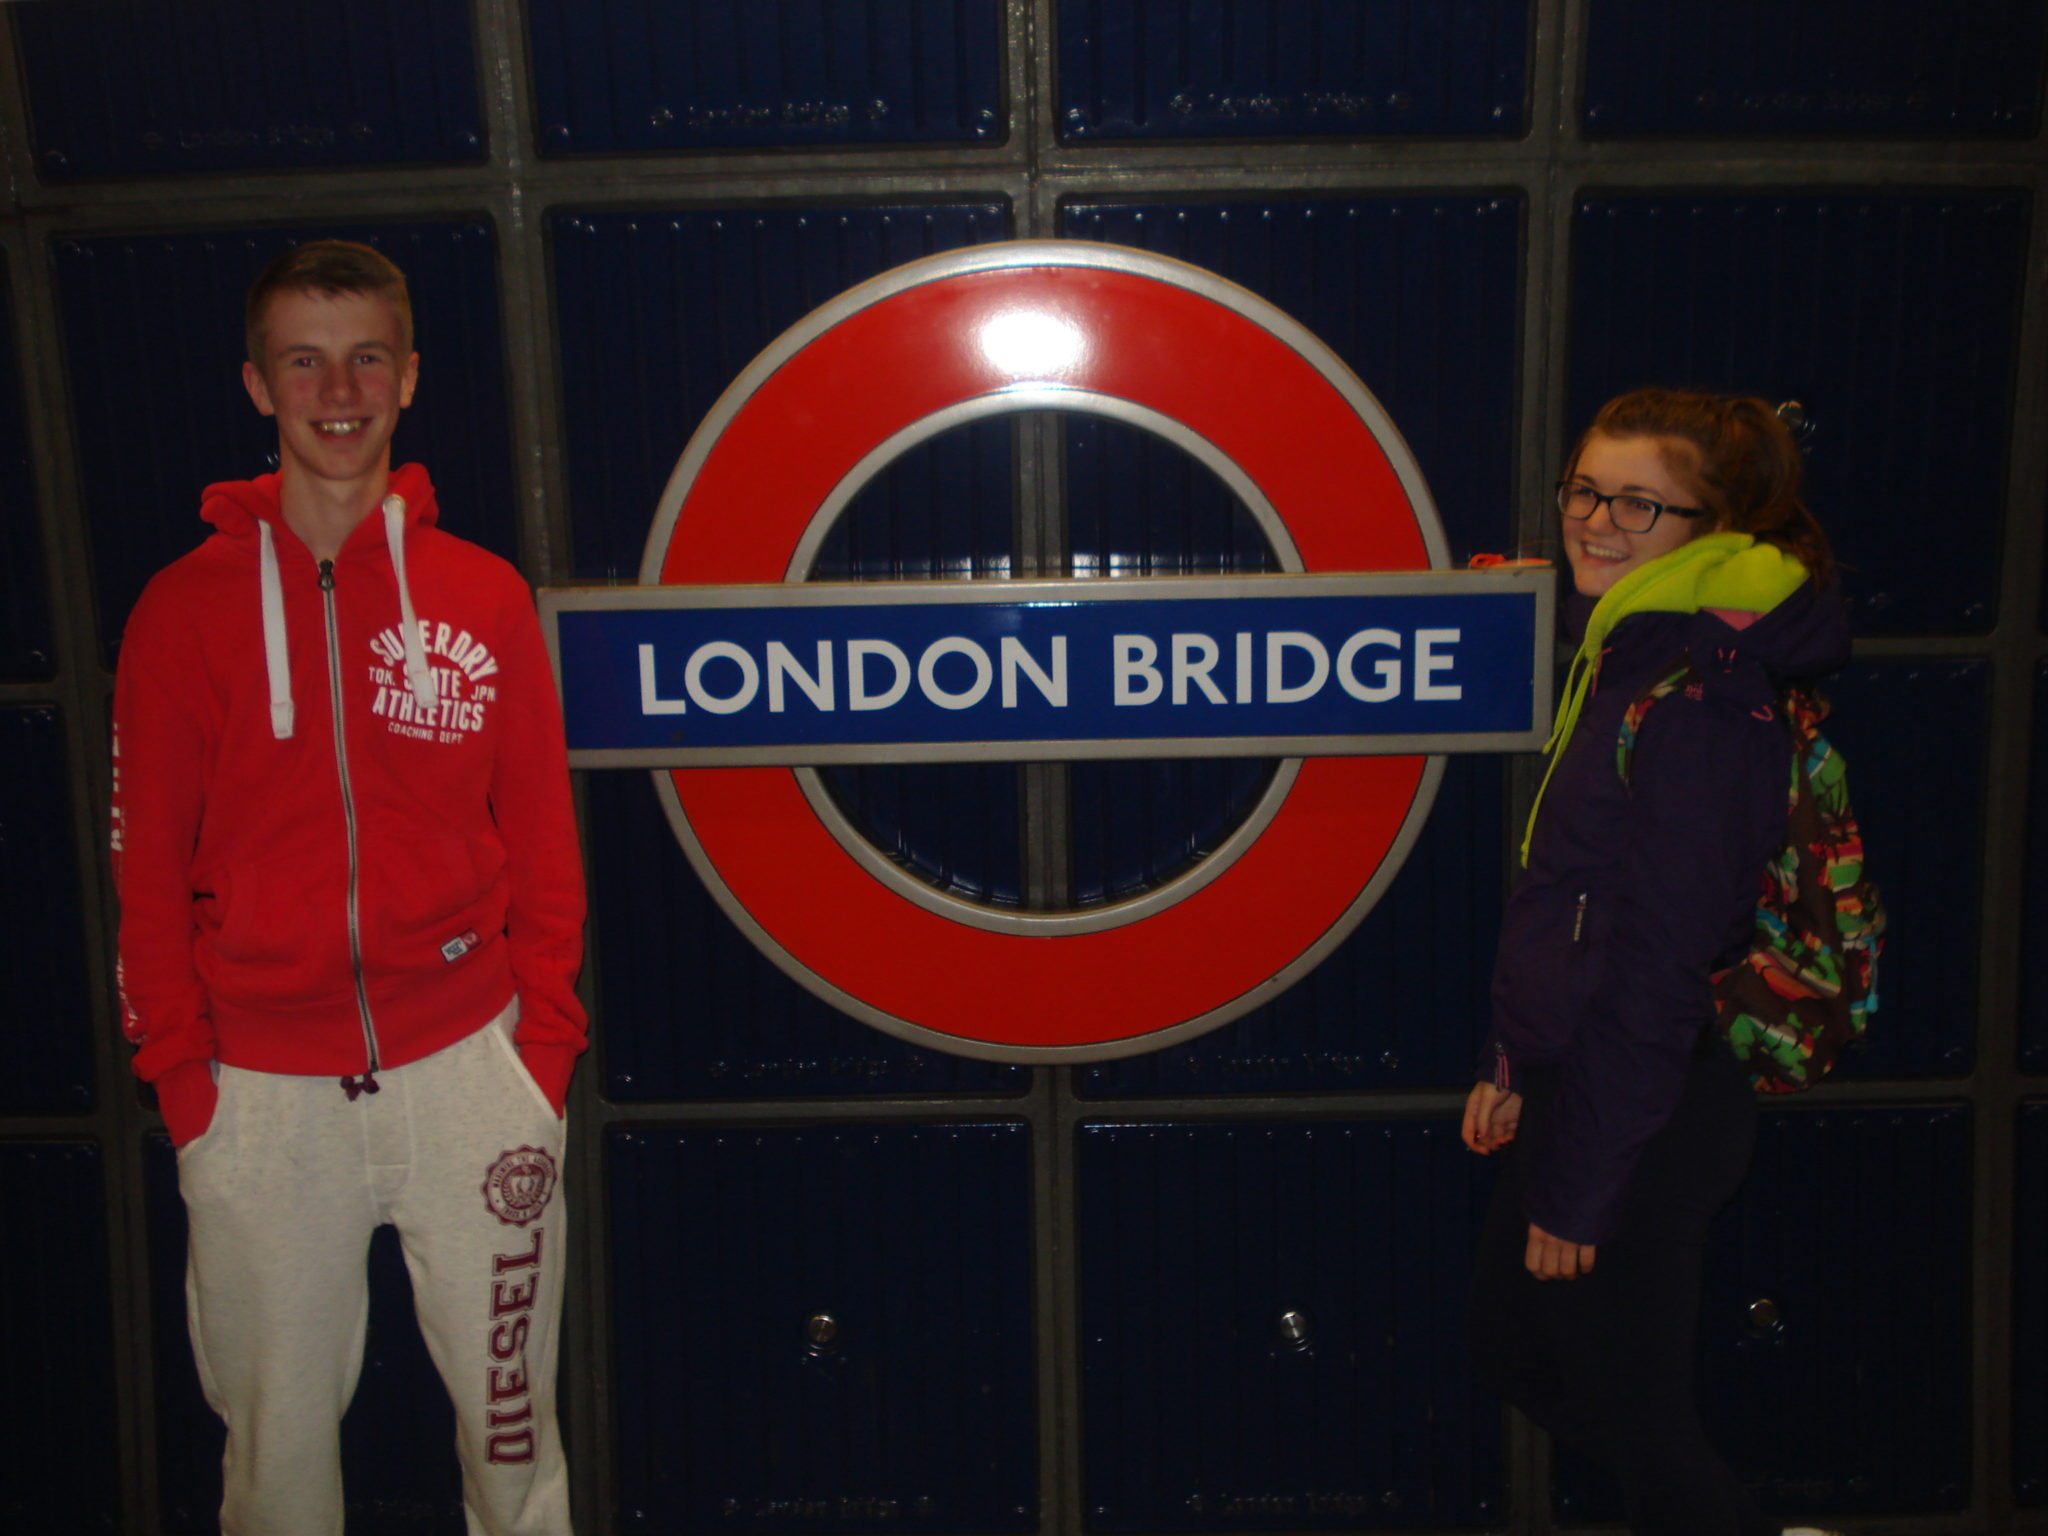 Jack O'Connor and Claire Mortell from desmond College at the iconic london bridge on their TY school tour of london